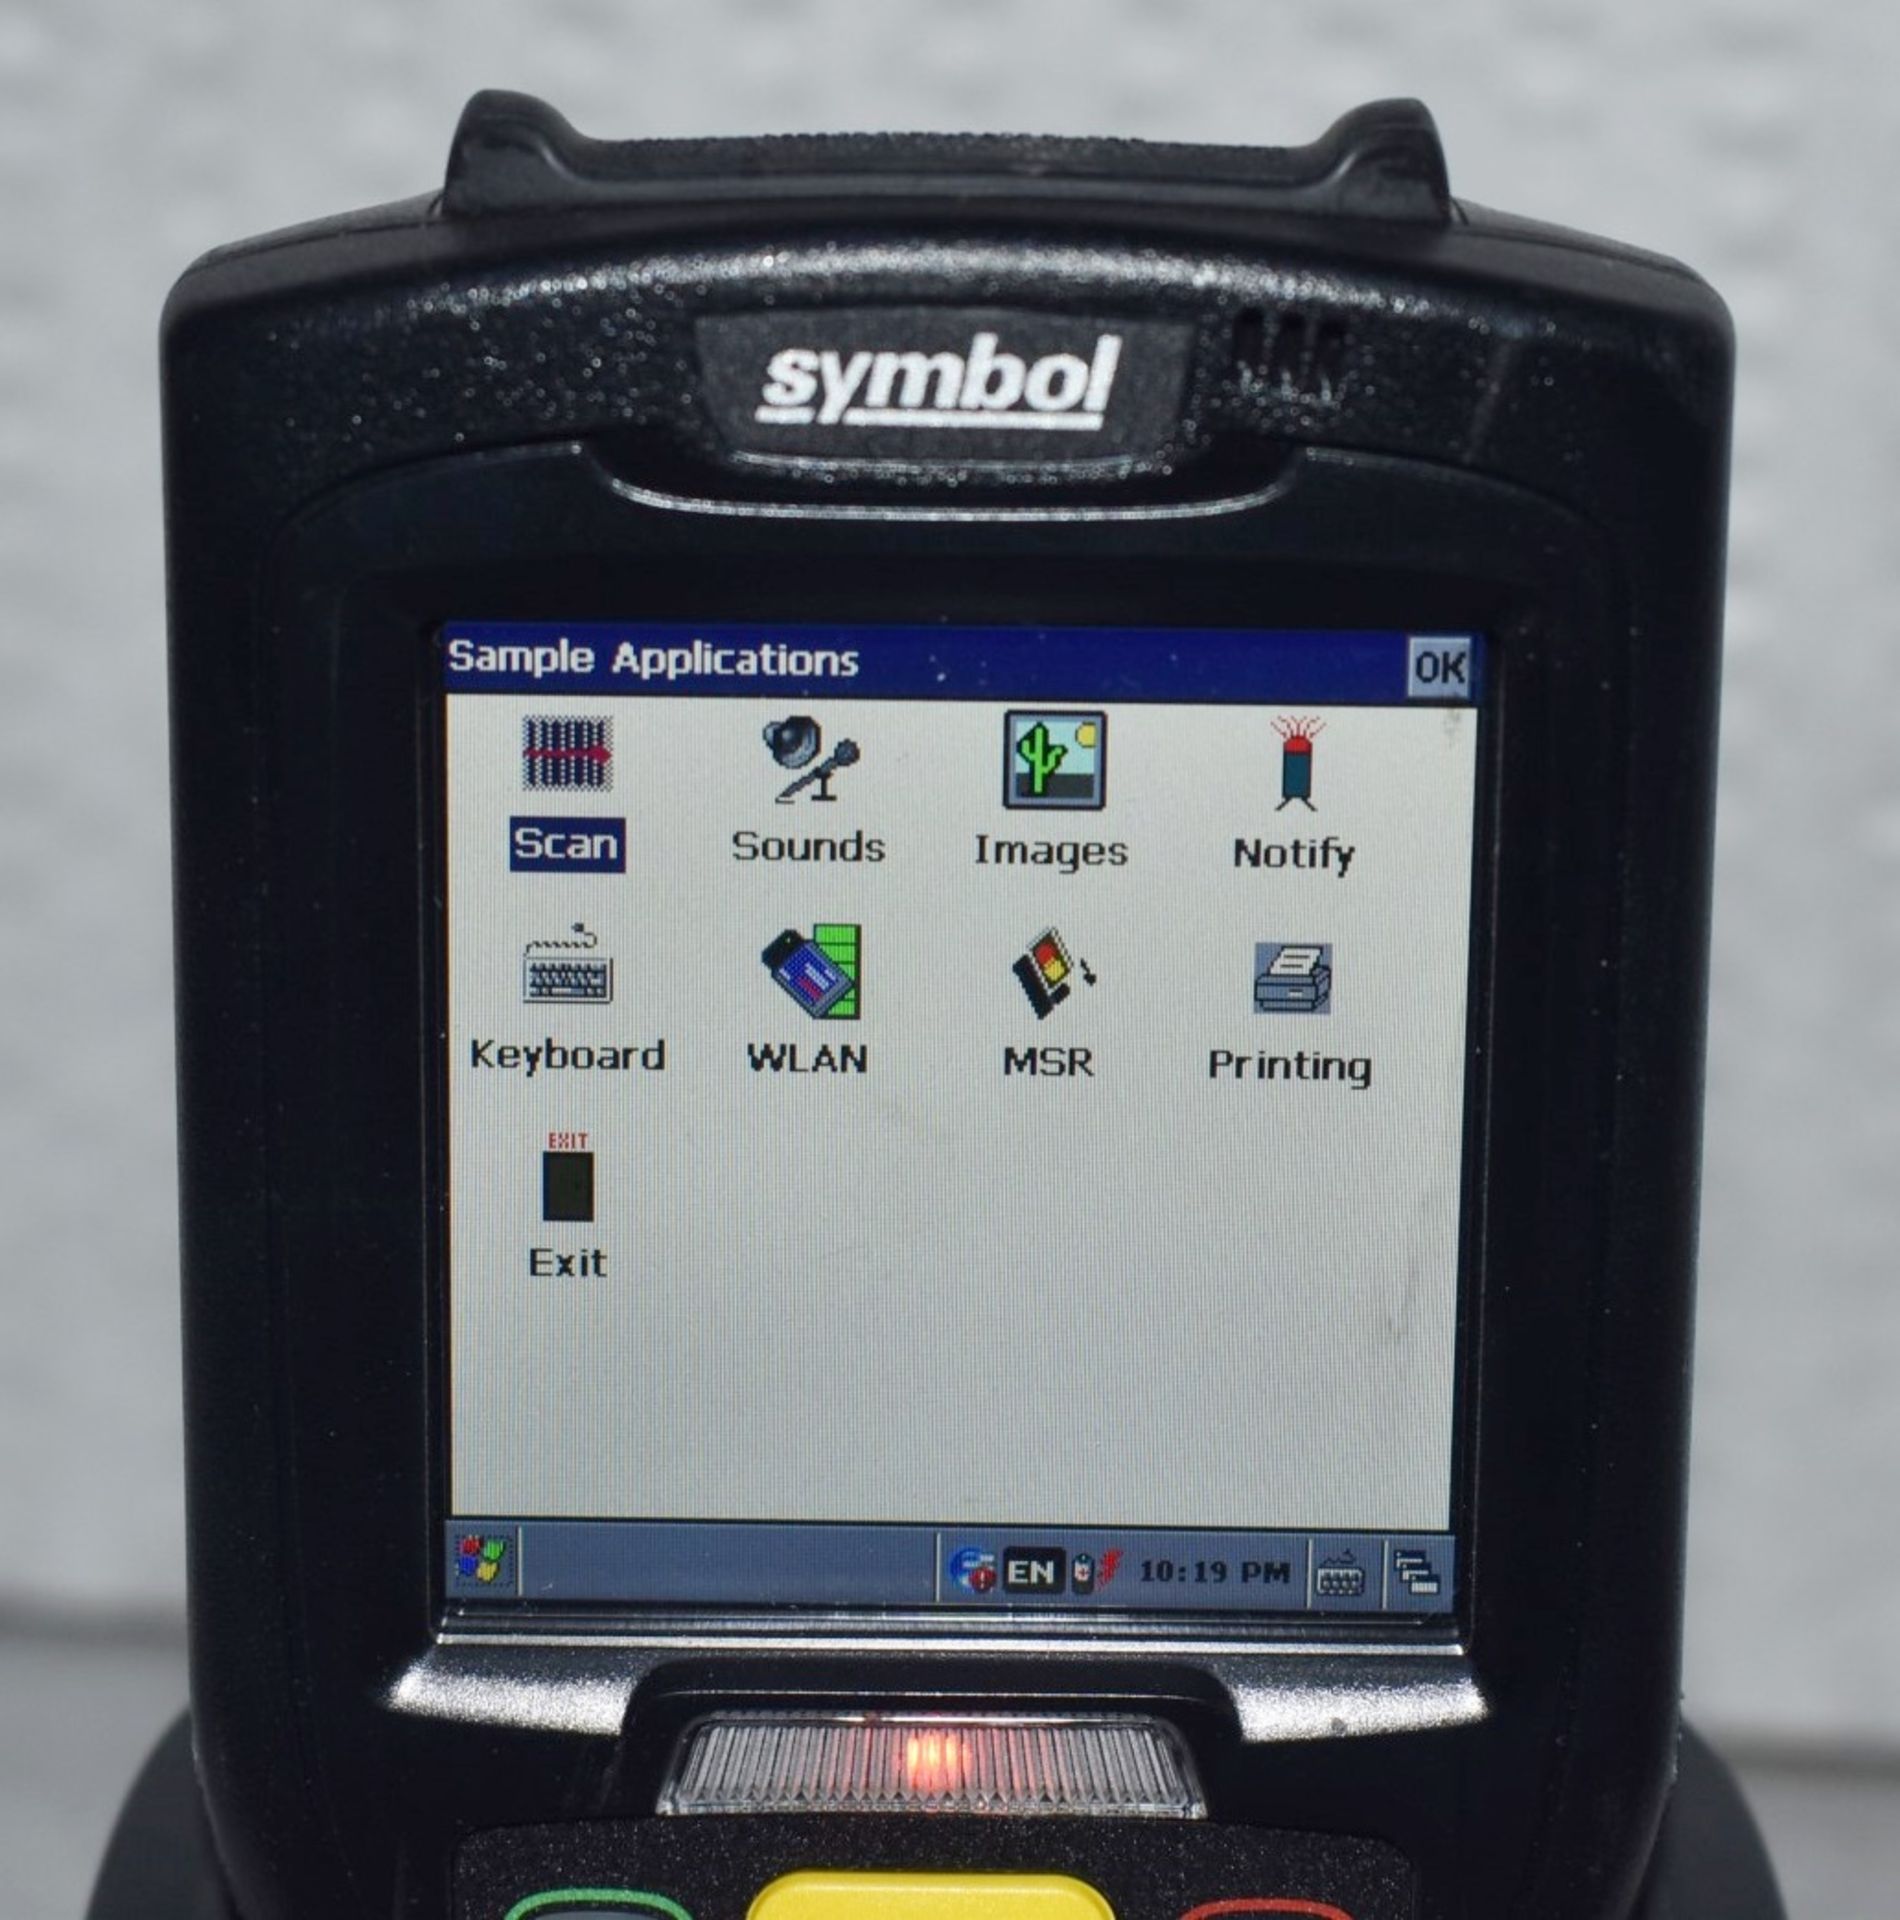 1 x Symbol MC3200 38 Key Laser Scanner With Docking Station - Features Windows Compact OS, - Image 3 of 10